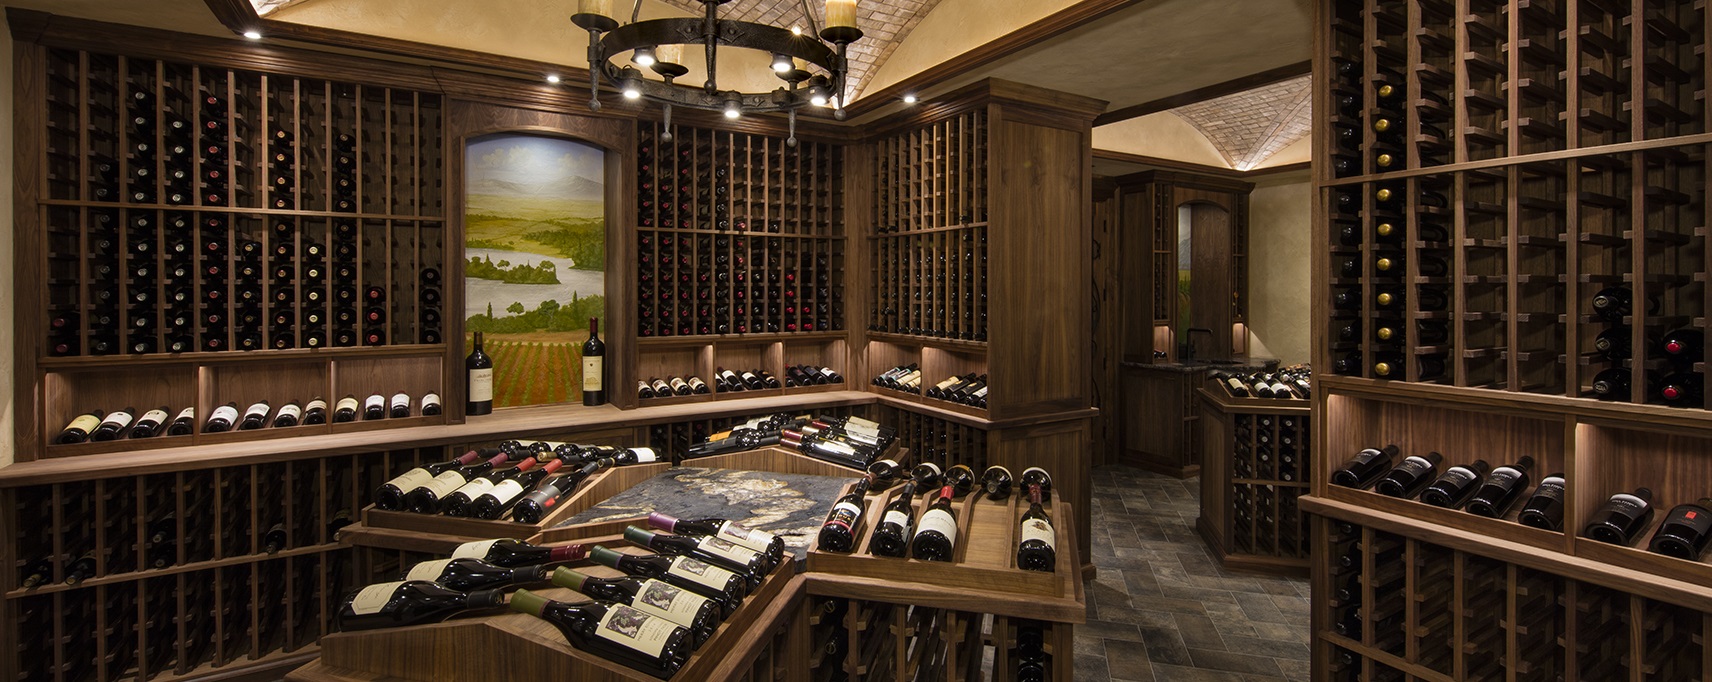 5 Reasons to Invest in a Wine Cellar   